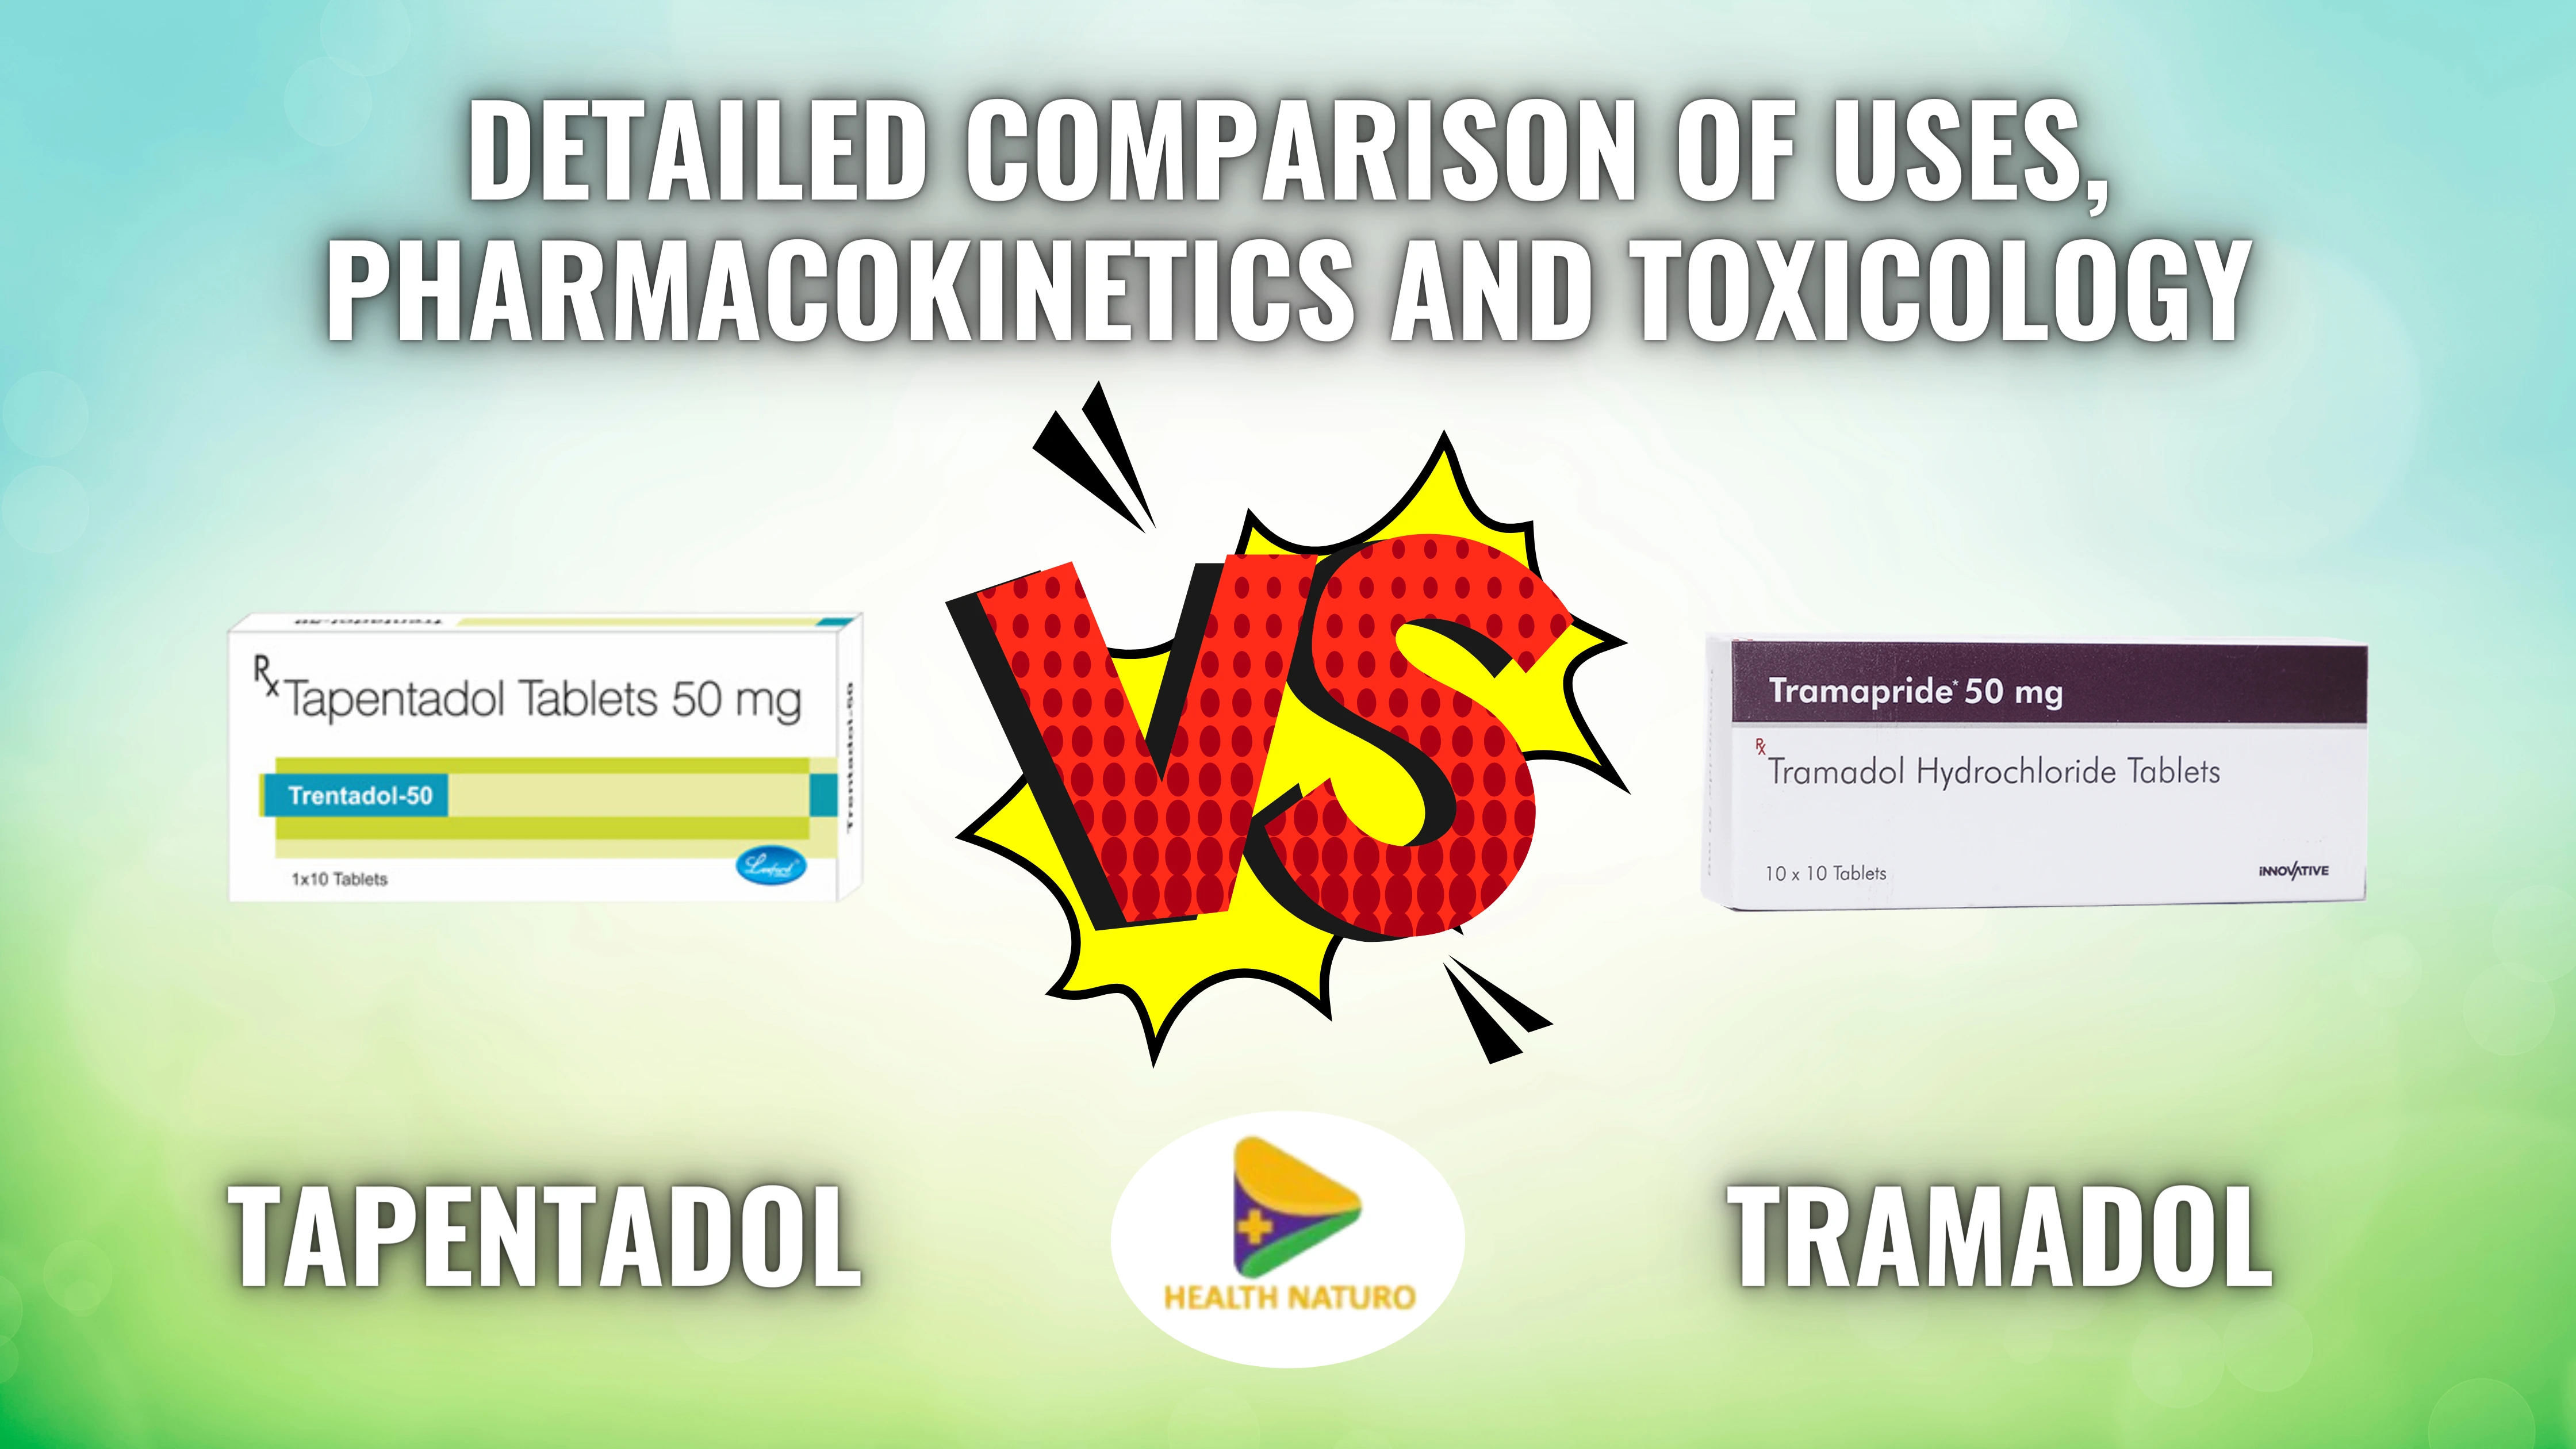 Tapentadol Vs Tramadol- Detailed Comparison Of Uses, Pharmacokinetics, And Toxicology